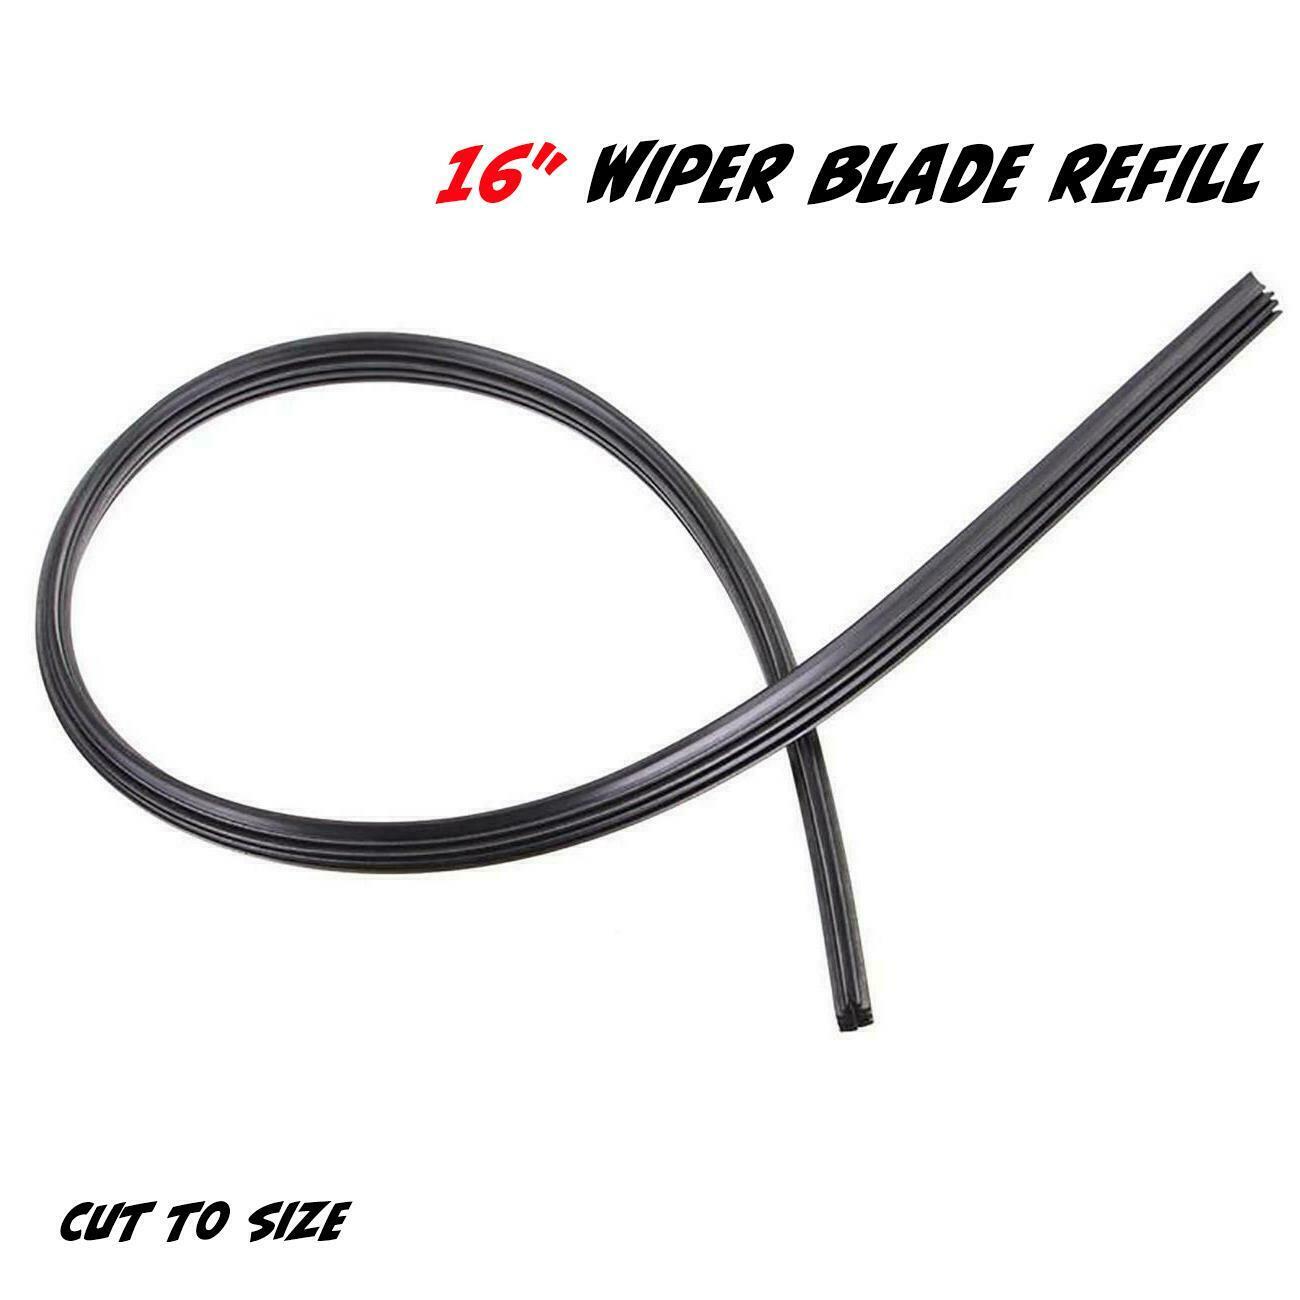 1 x universal rear wiper blade rubber Insert Refill 16" cut to size replacement